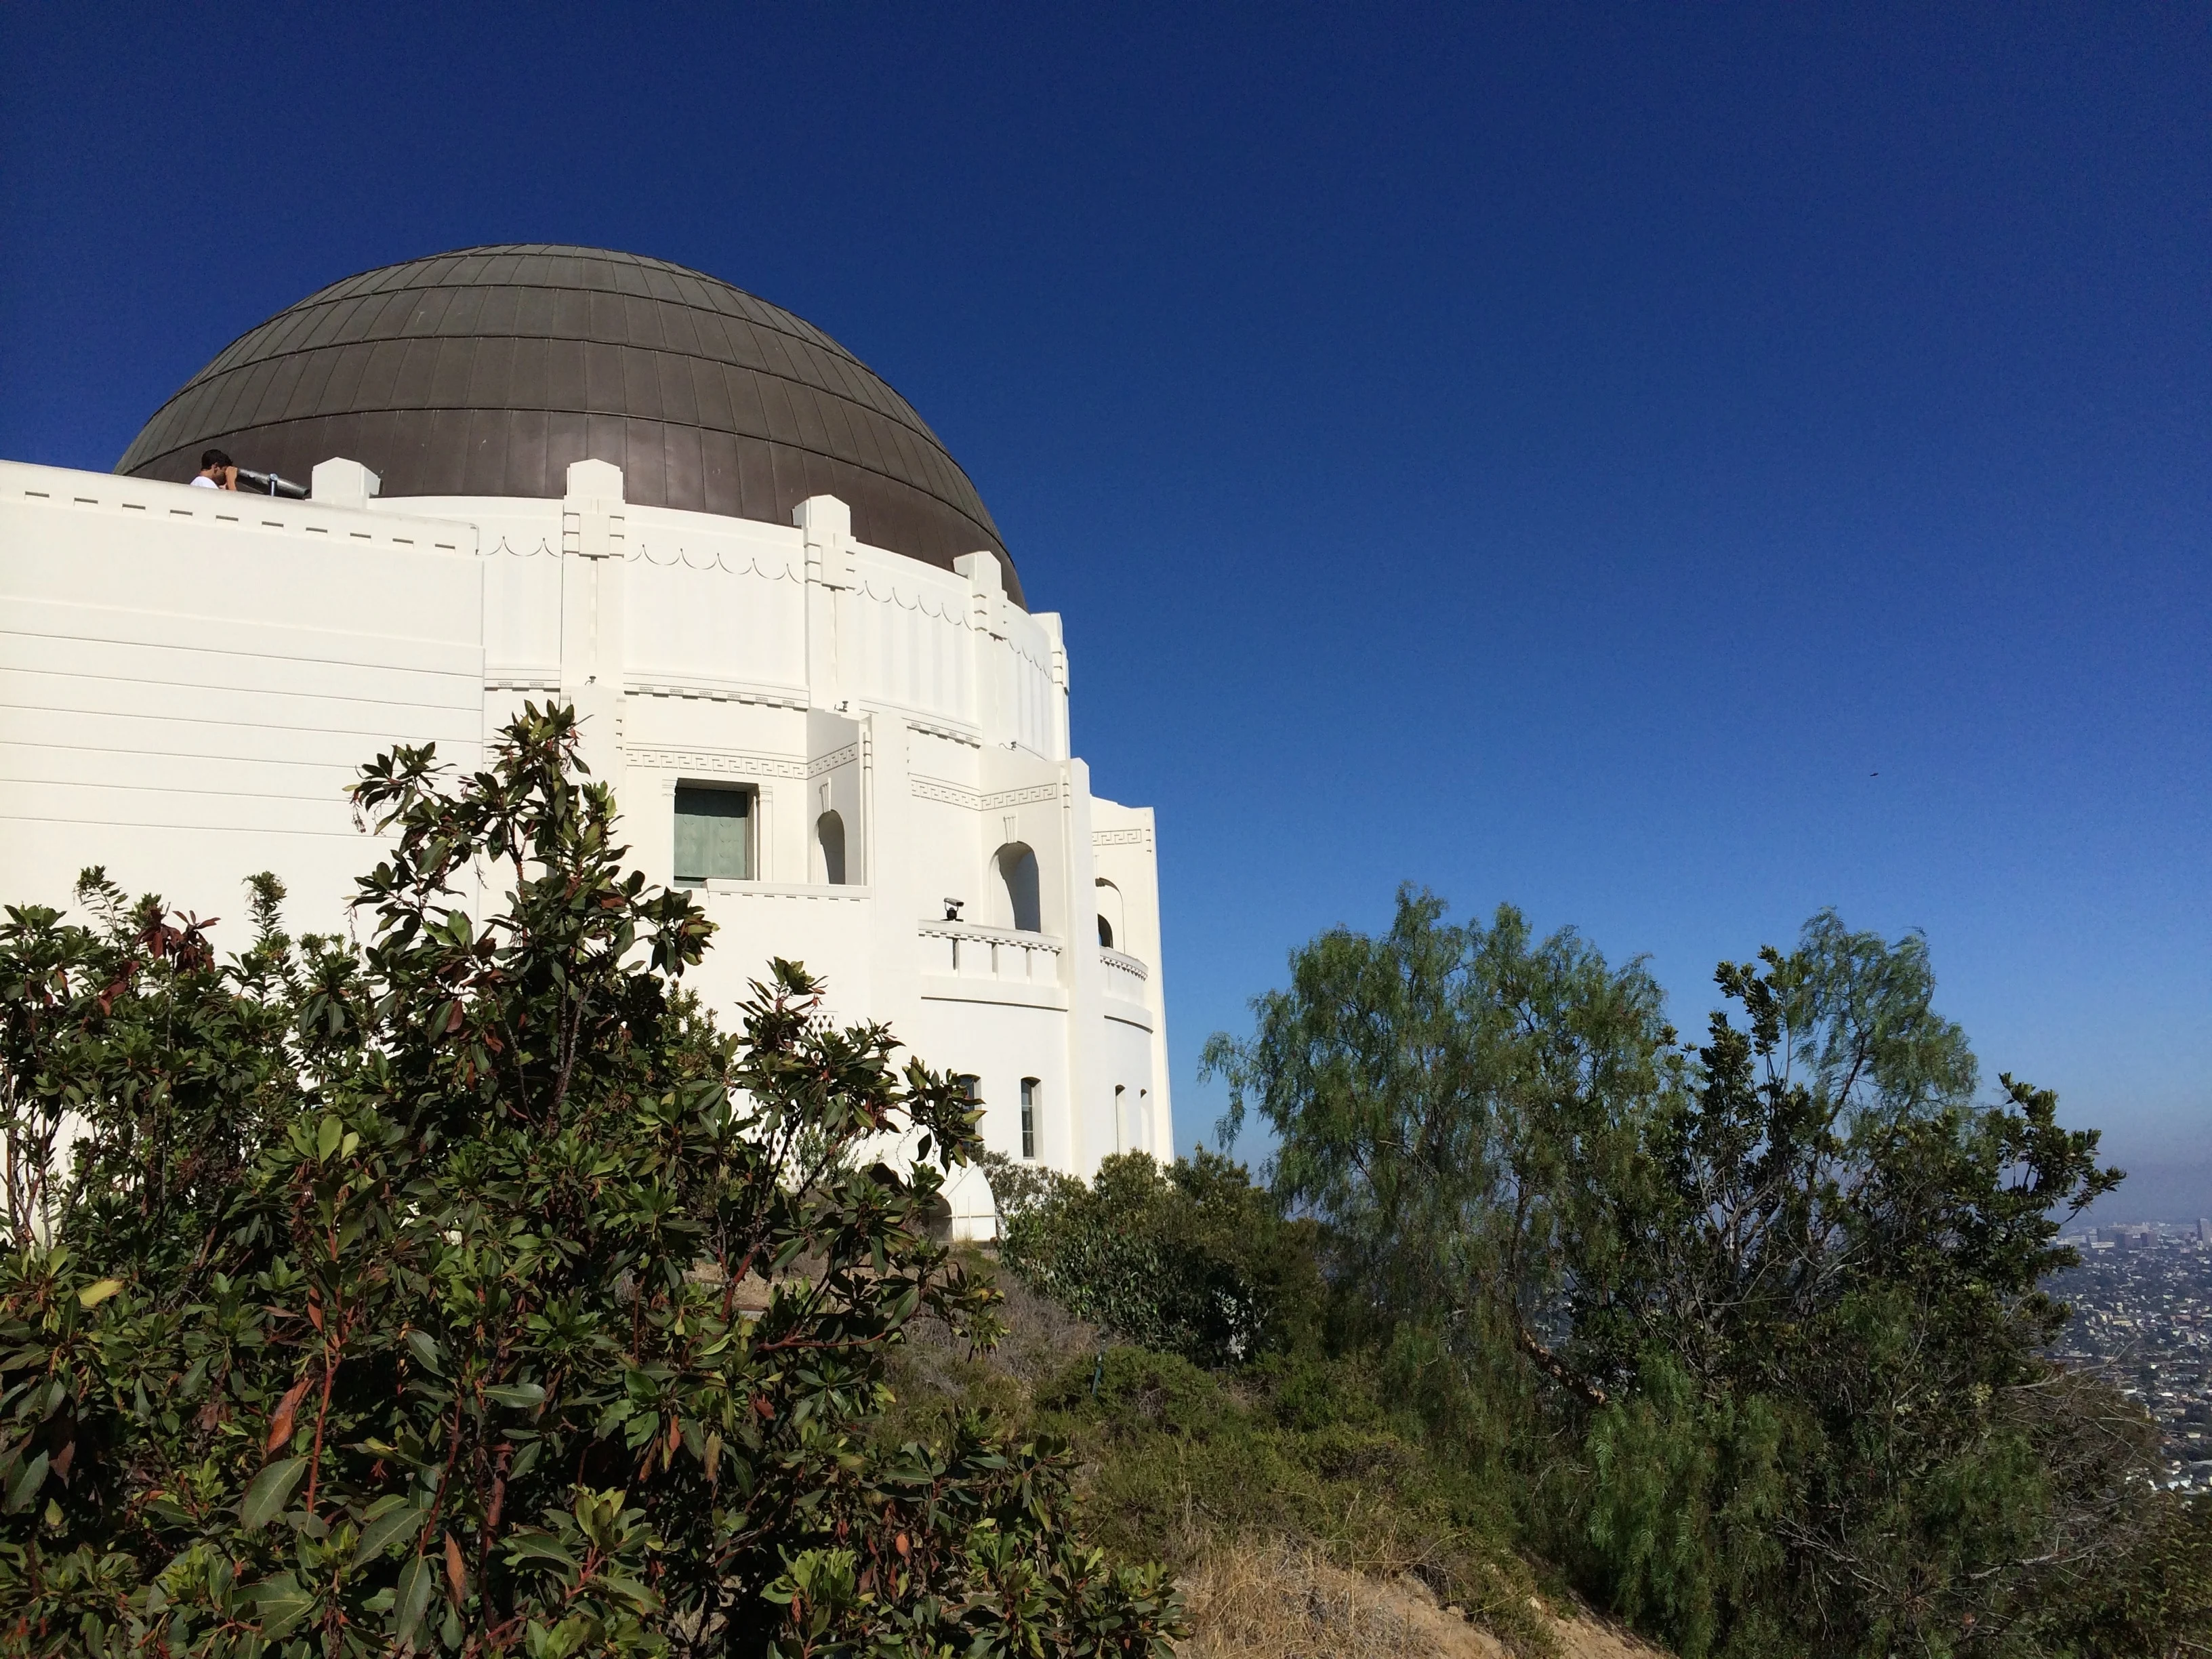 Griffith Observatory: Photo by Yvonne Condes